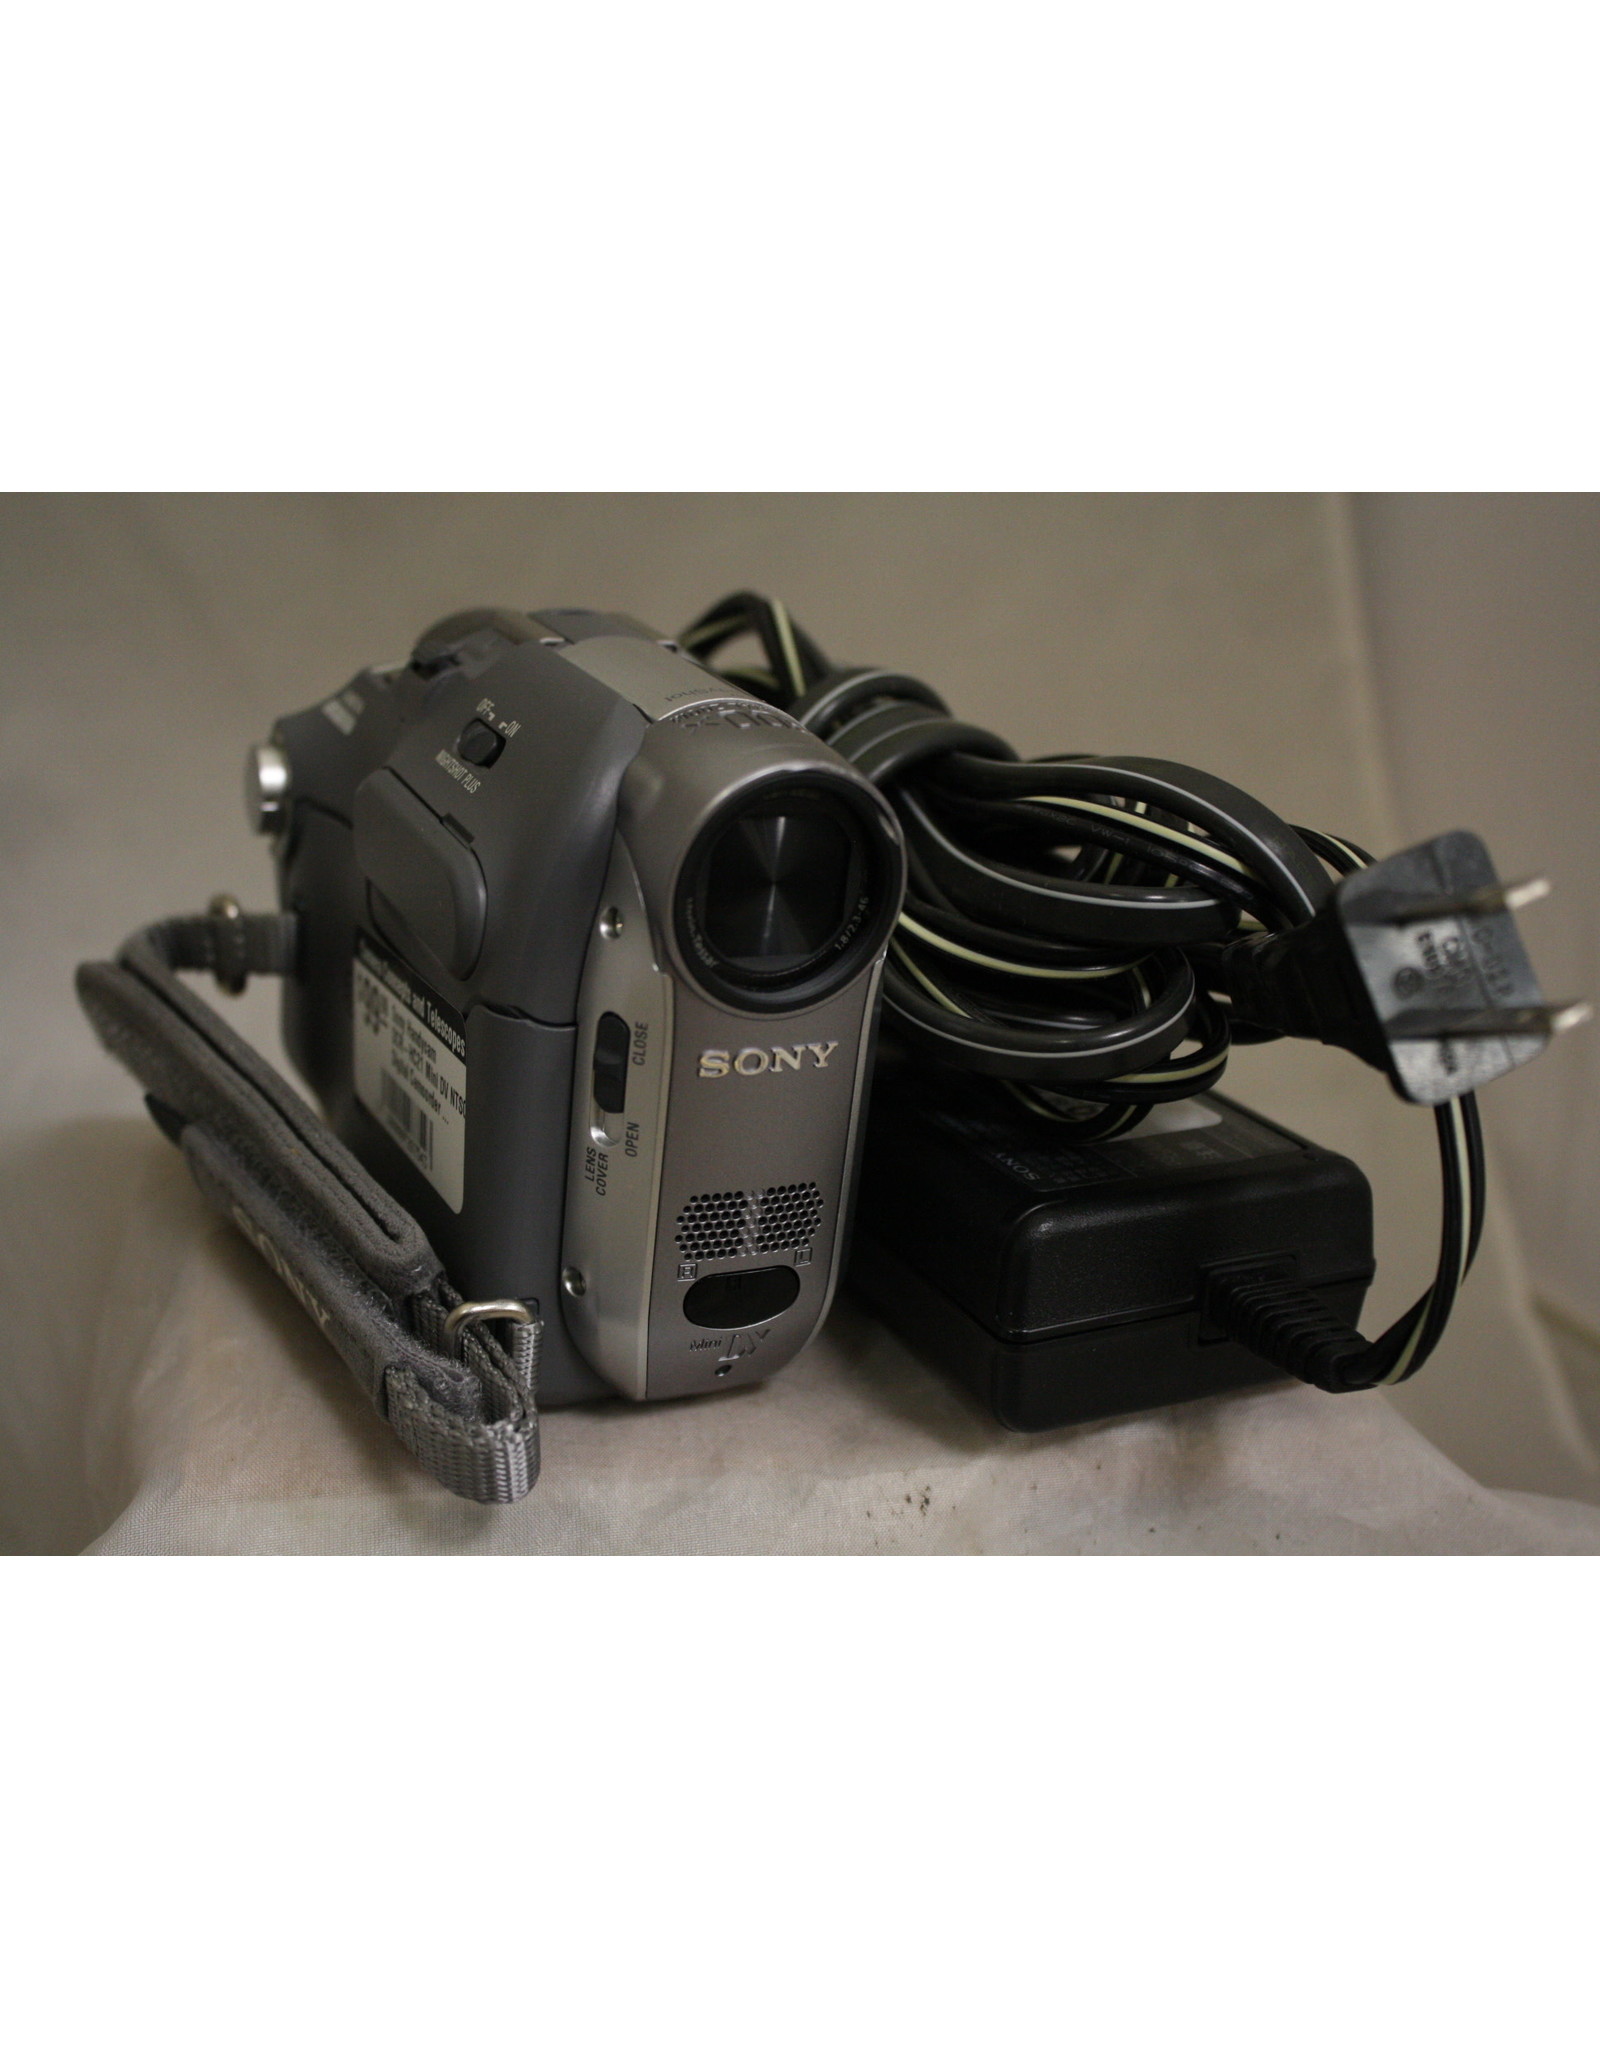 Sony Handycam DCR-HC21 Mini DV NTSC Digital Camcorder with charger battery(FULLY TESTED!) - Camera Concepts & Telescope